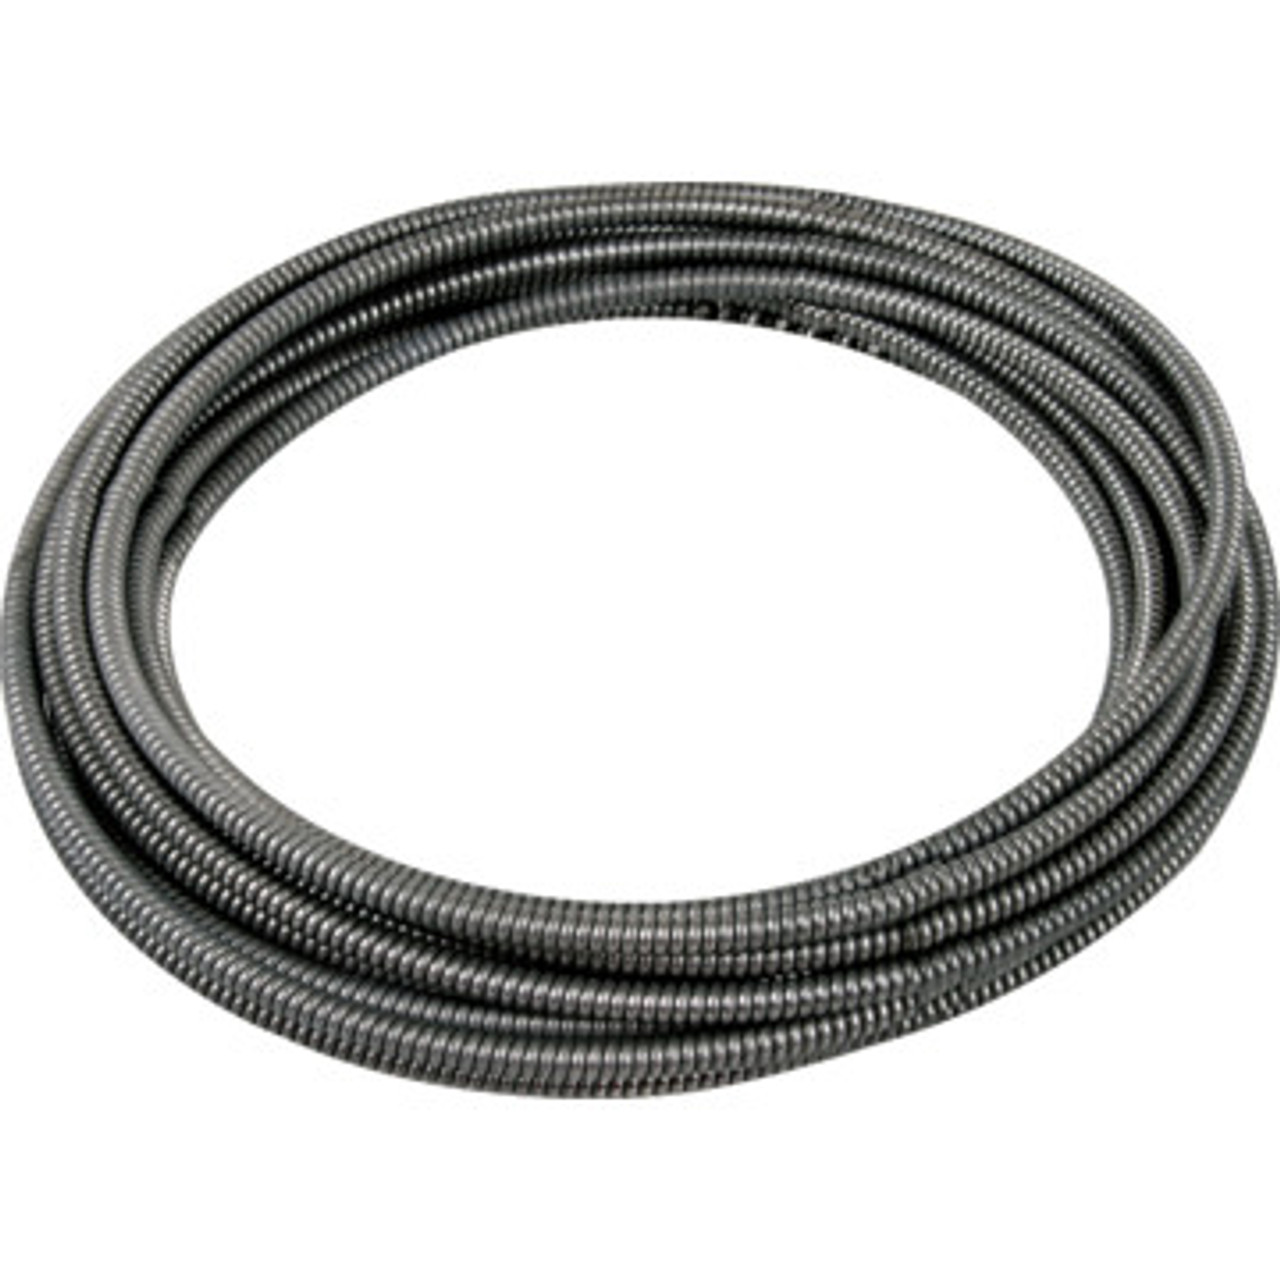 Drain Cleaning Cables, Flexicore Cables - General Pipe Cleaners